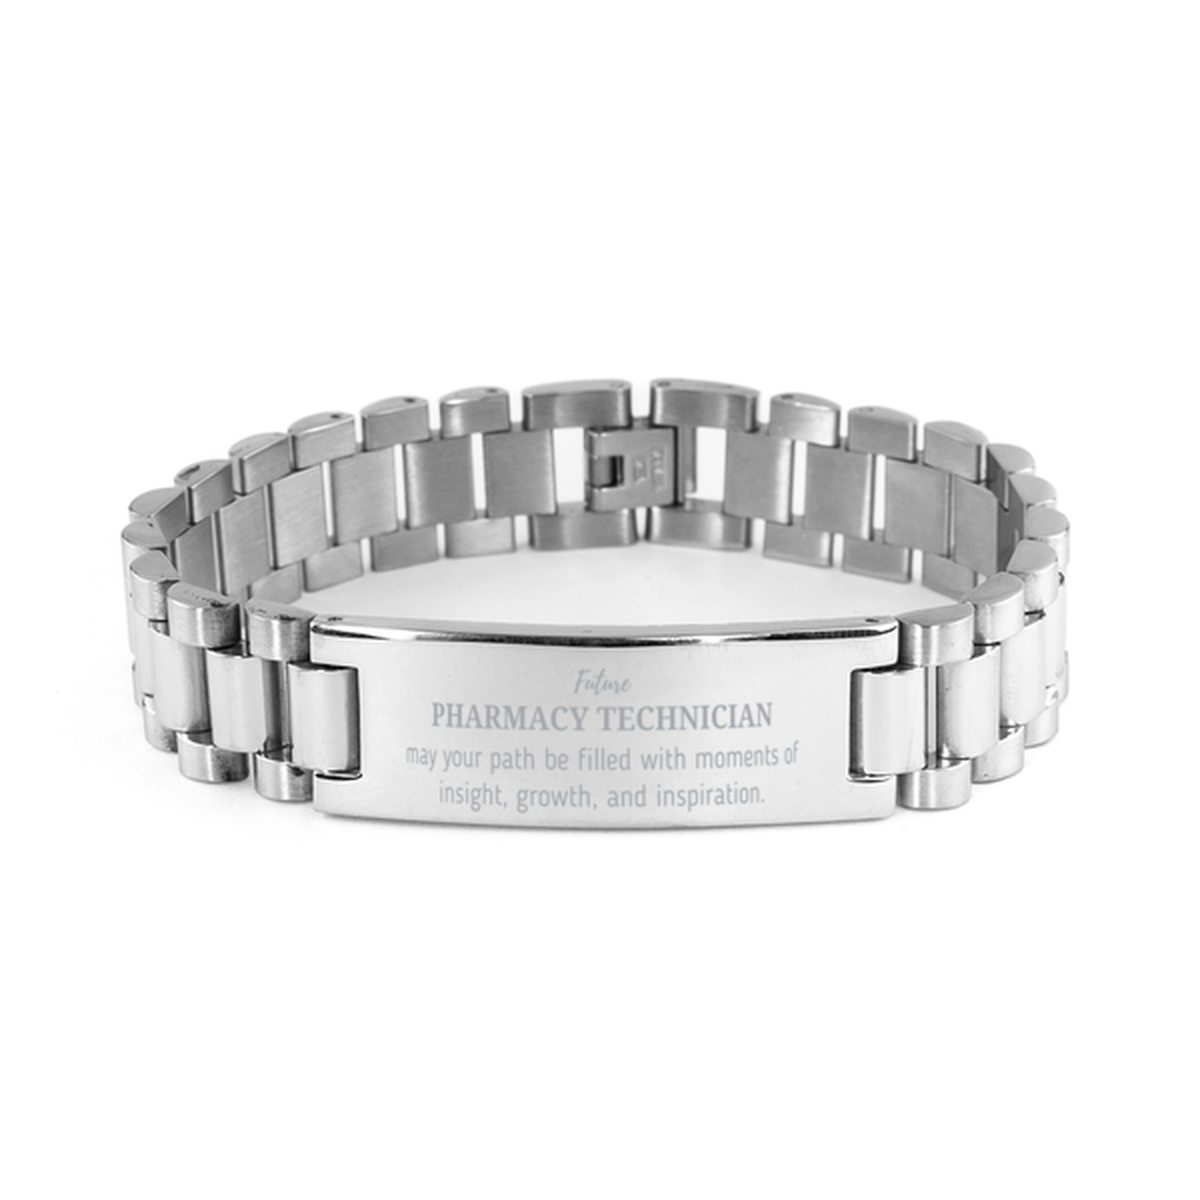 Future Pharmacy Technician Gifts, May your path be filled with moments of insight, Graduation Gifts for New Pharmacy Technician, Christmas Unique Ladder Stainless Steel Bracelet For Men, Women, Friends